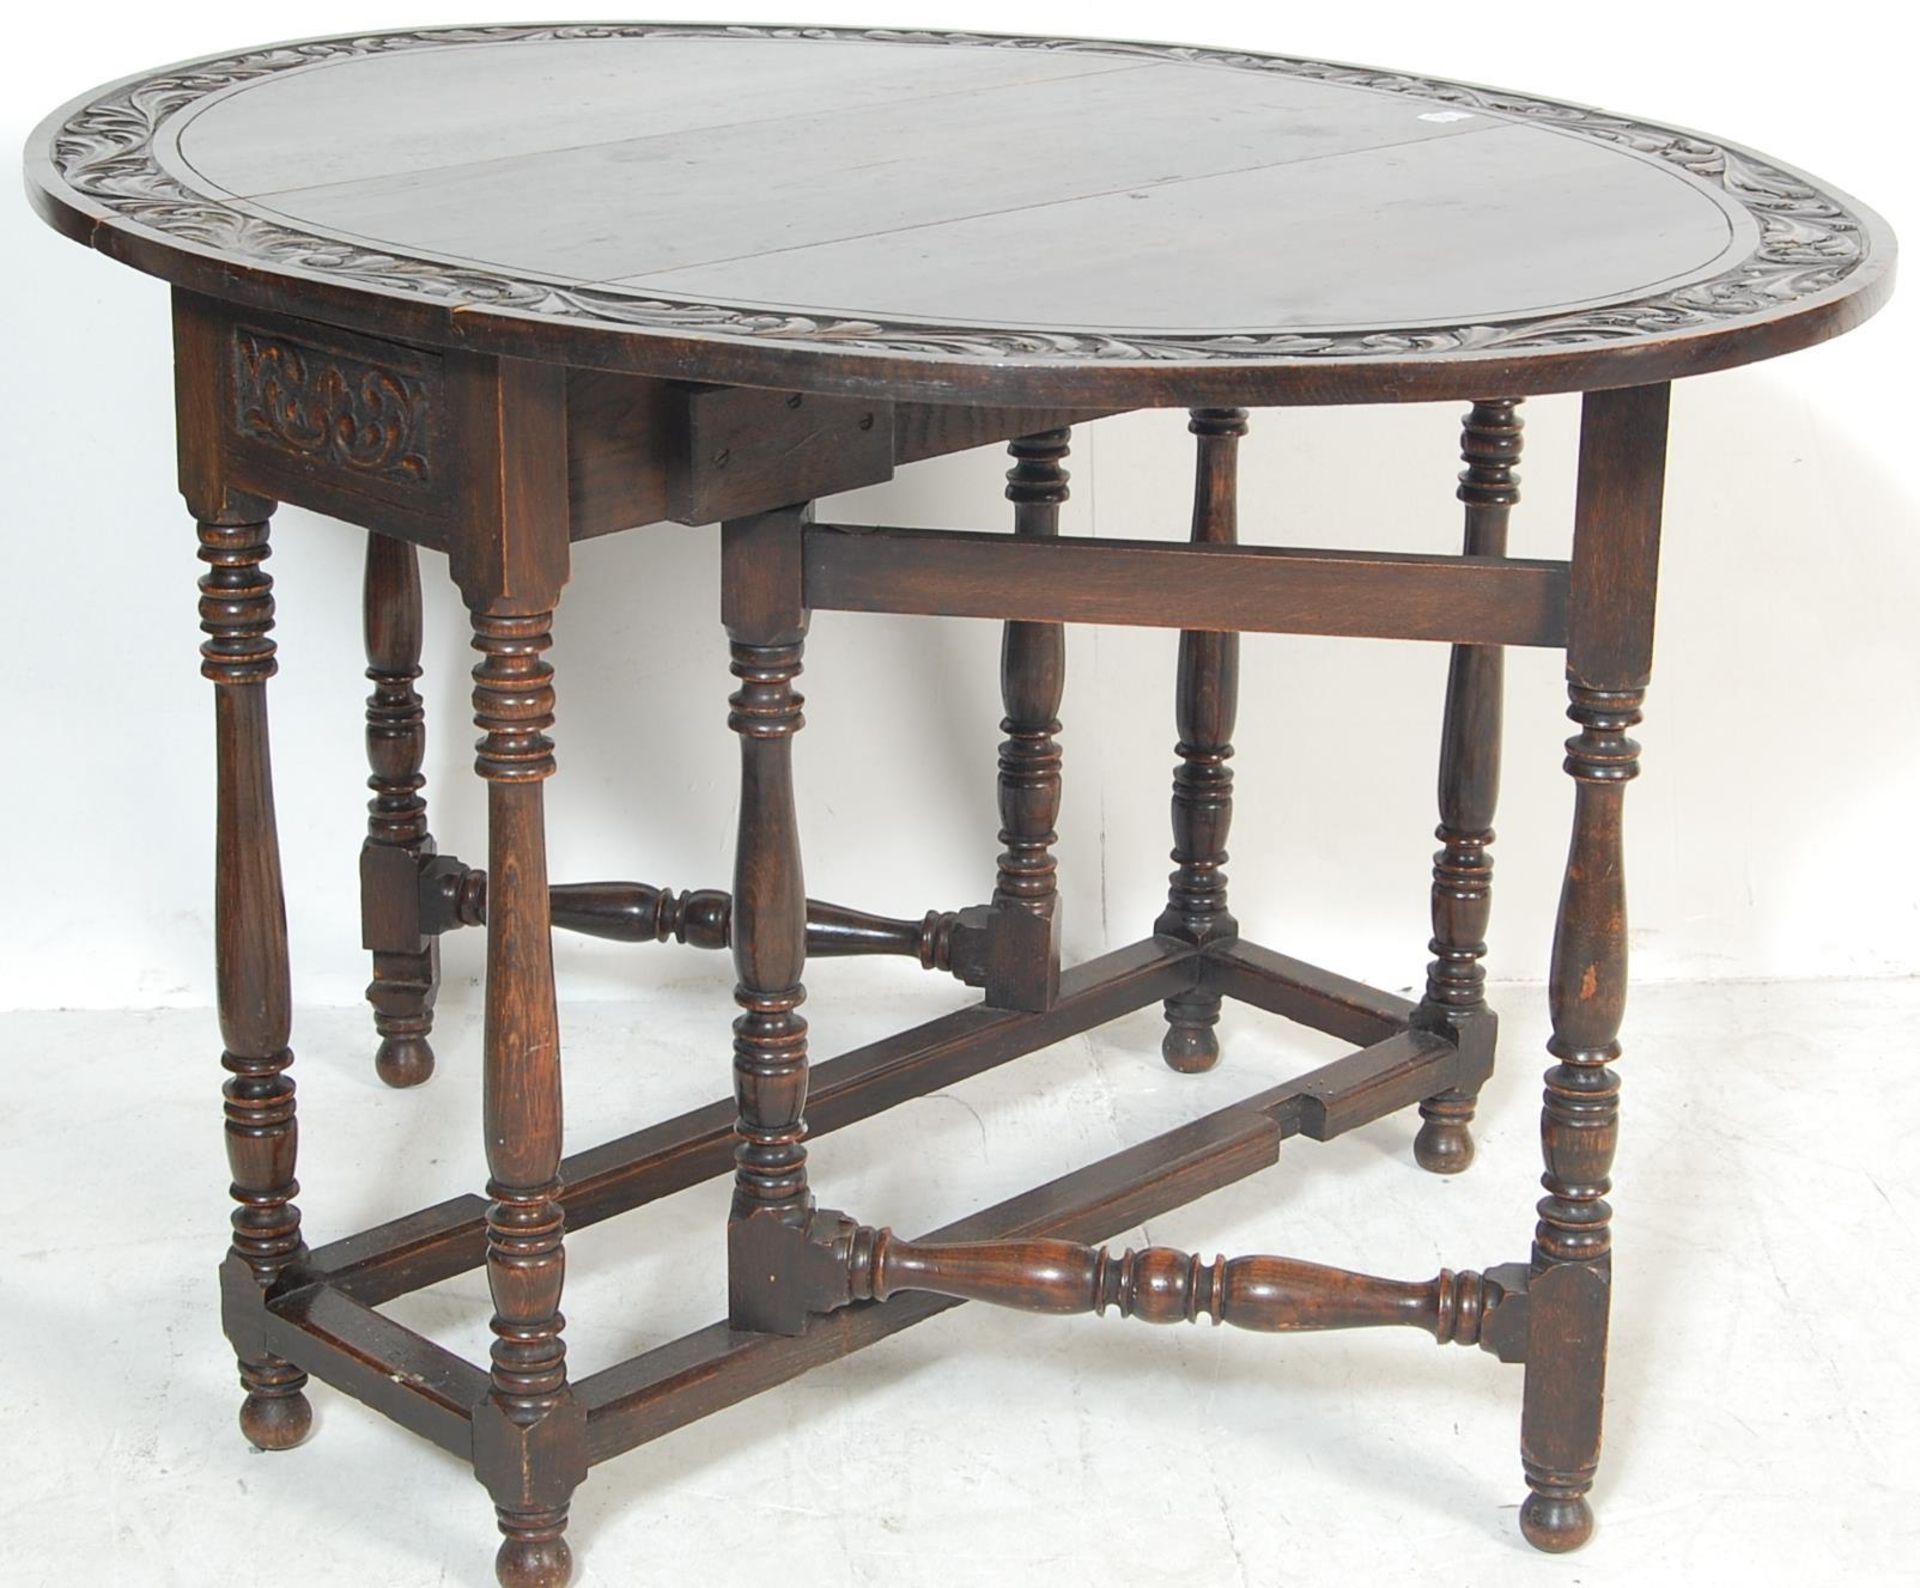 20TH CENTURY JACOBEAN STYLE DROP LEAF OAK TABLE / DINING TABLE - Image 2 of 5